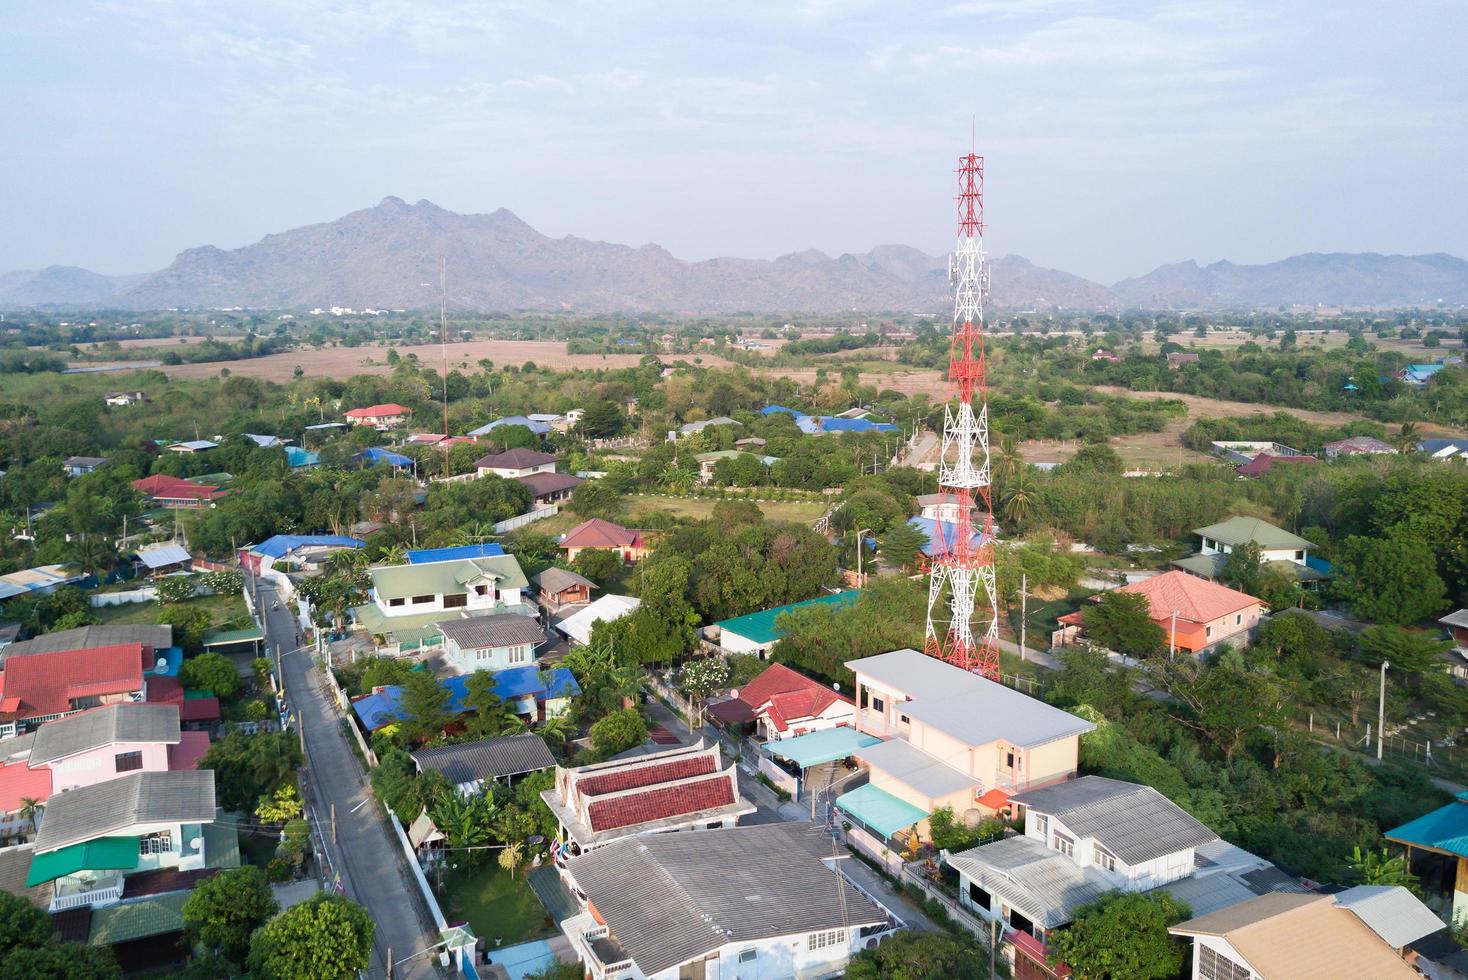 aerial view of tower mobile phone in village photo